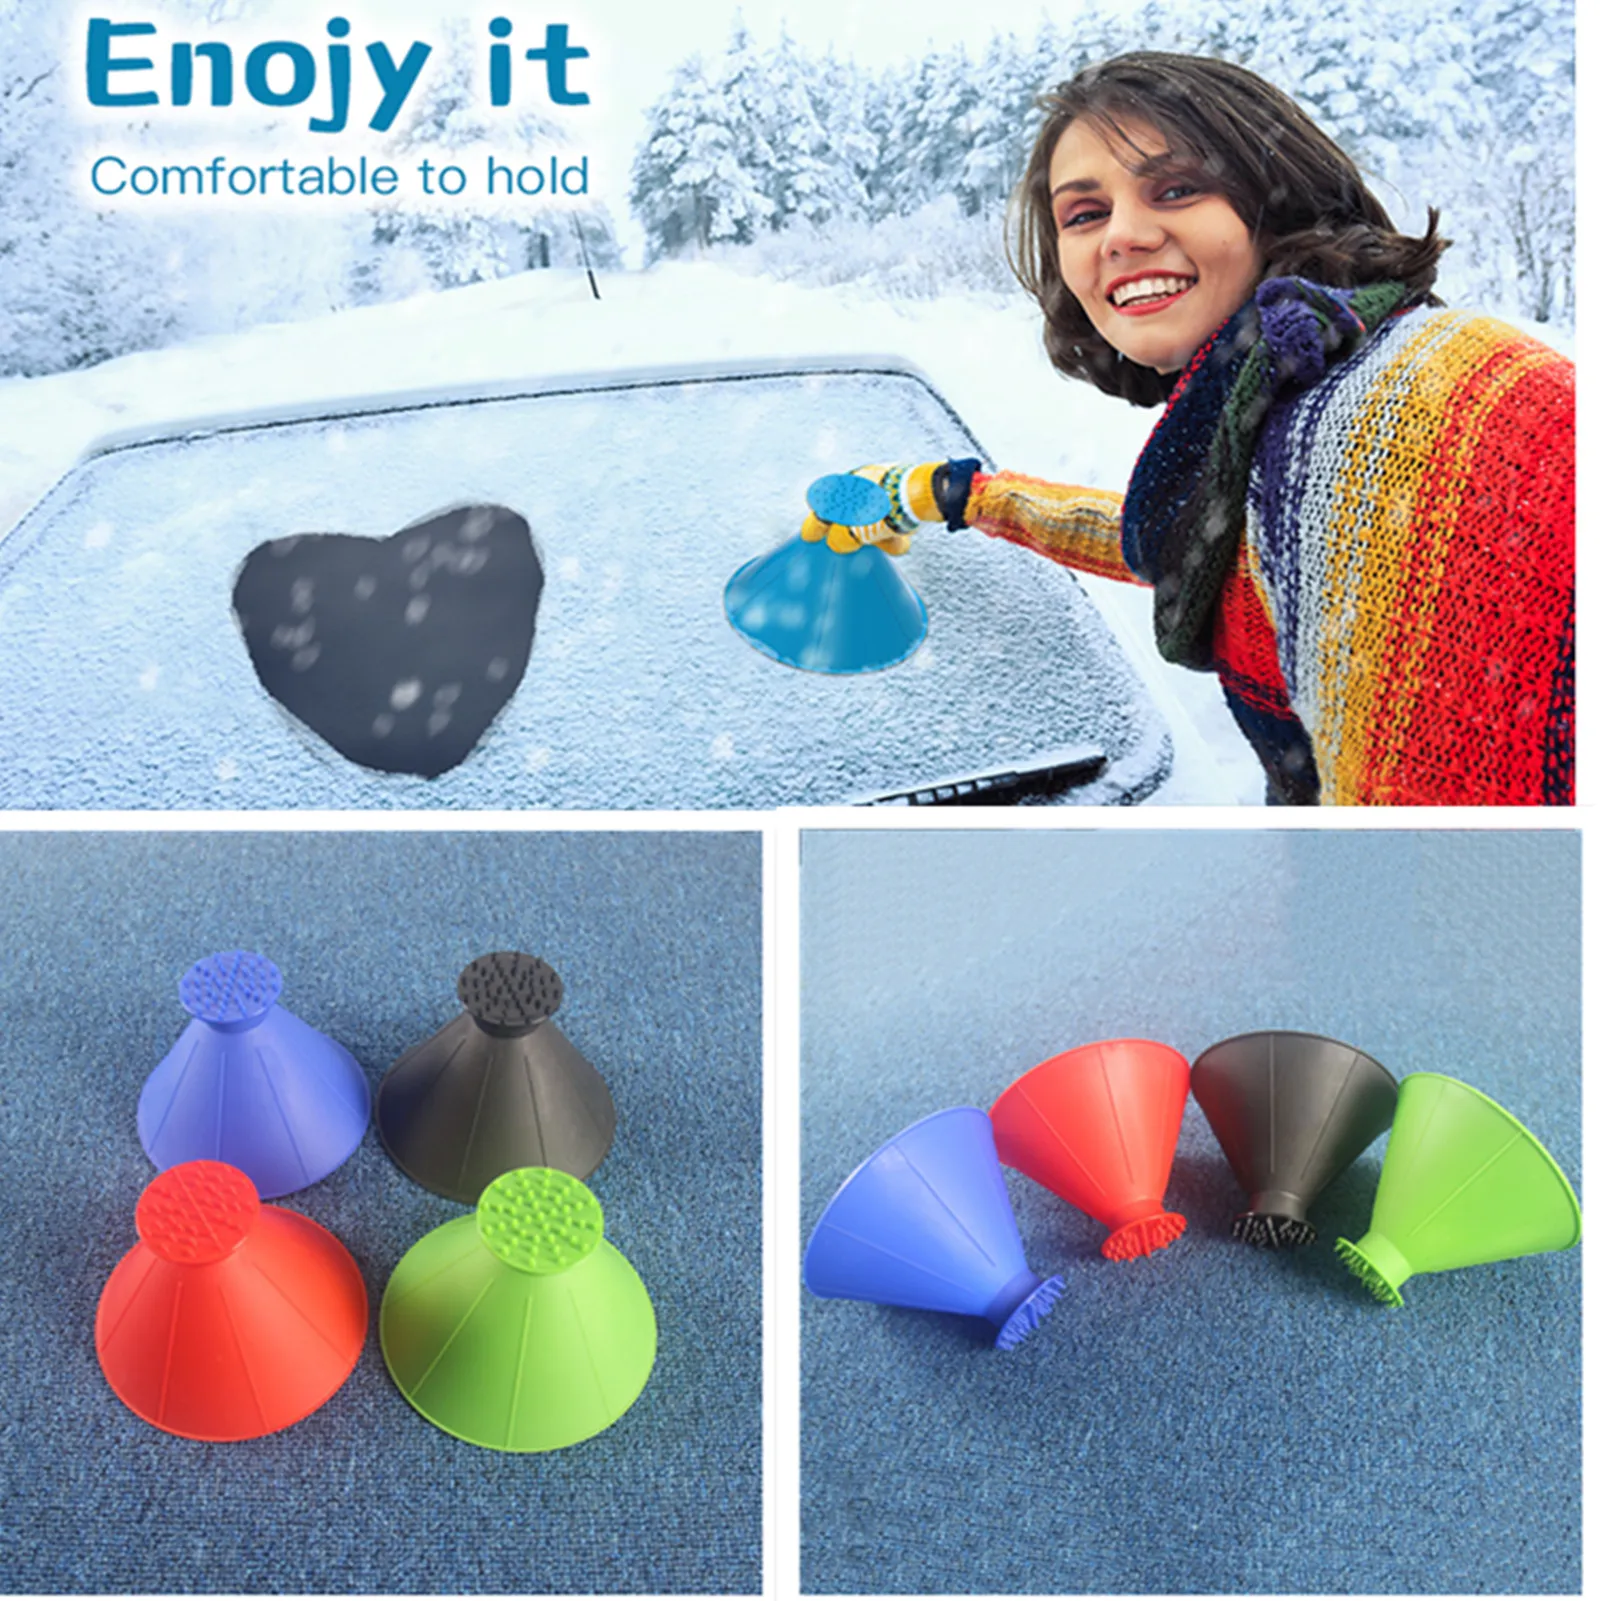  3 Pcs Magical Ice Scrapers for Car Windshield, Round Snow  Scraper with Funnel, Cone-Shaped Car Snow Remover, Car Window Scraper for  Ice & Snow, Car Winter Accessories, Gift for Chrismas (Green) 